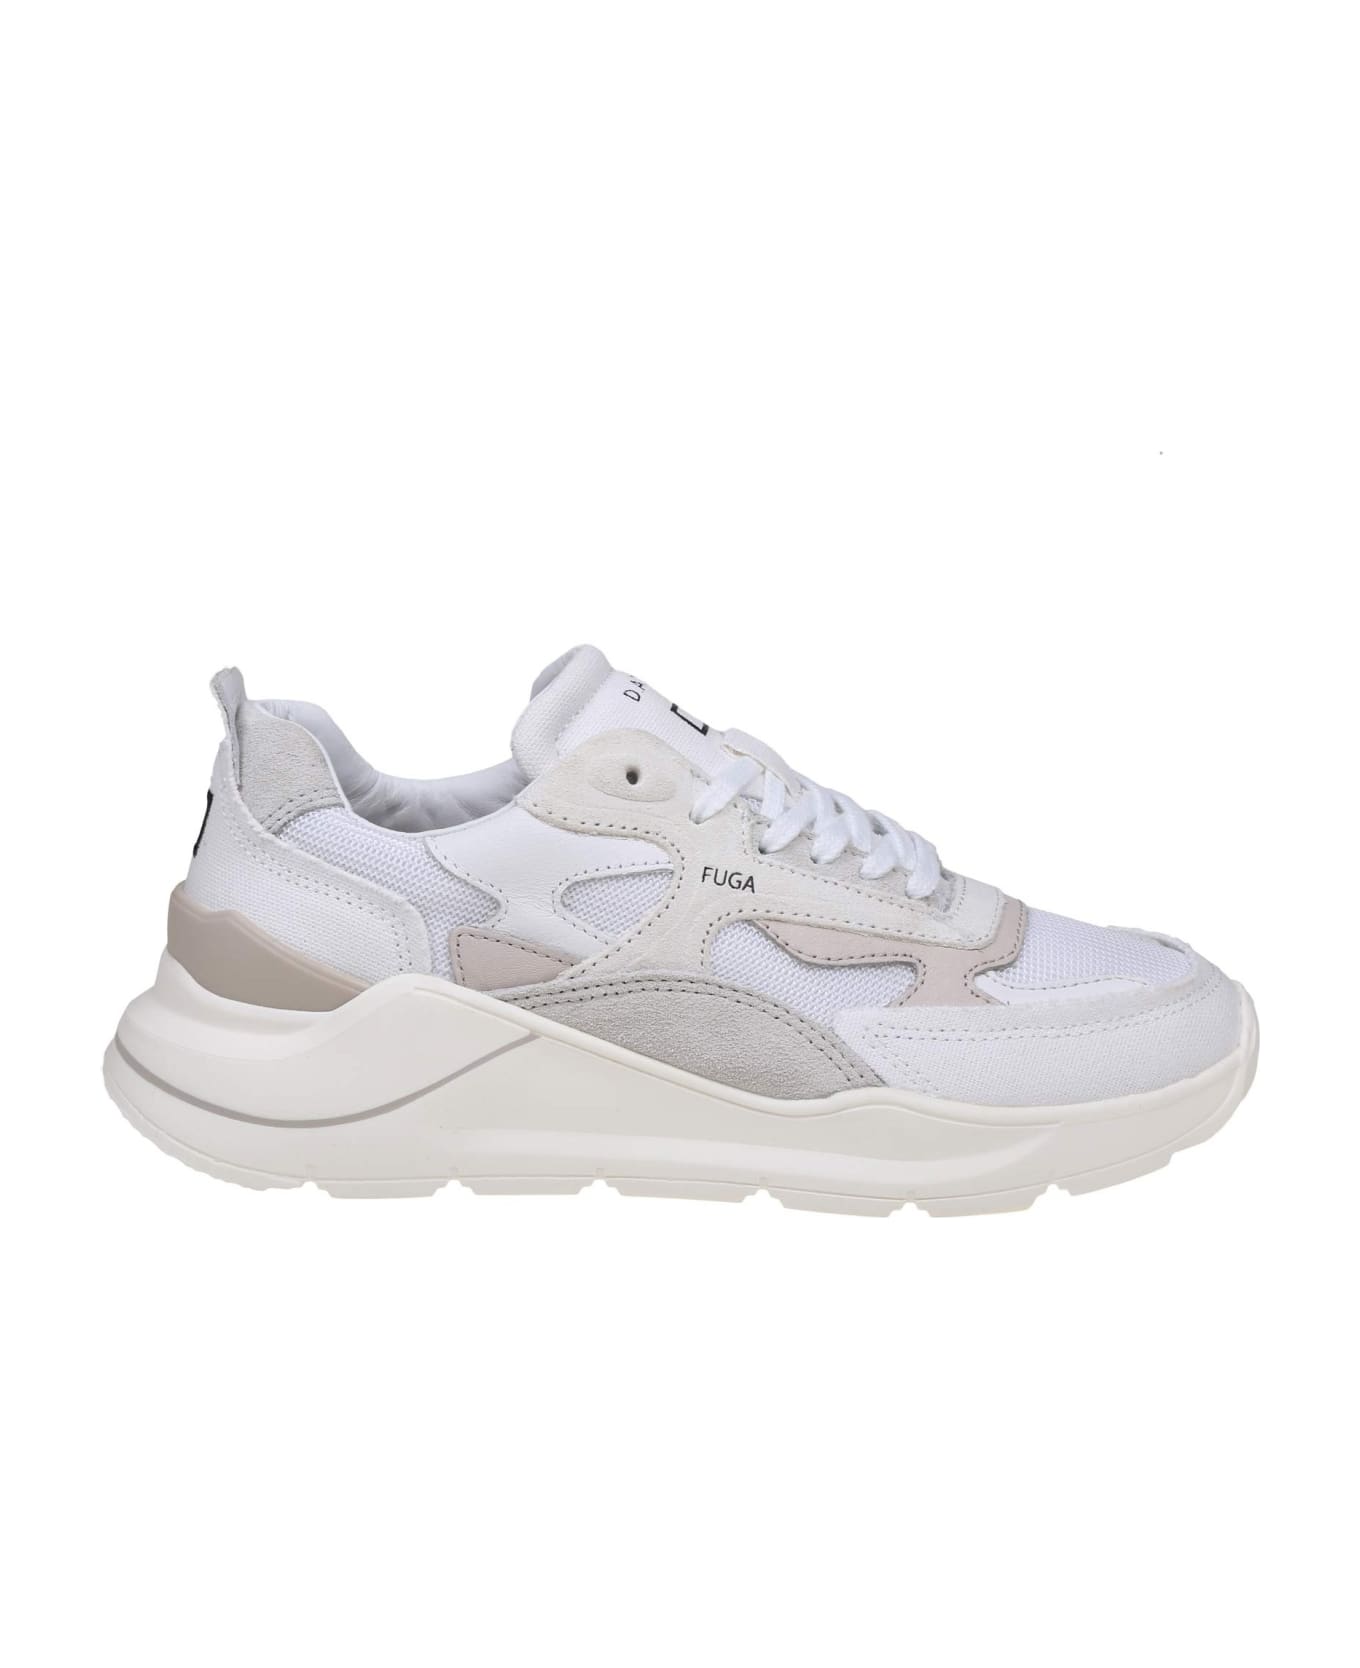 D.A.T.E. Fuga Sneakers In White Leather And Fabric - White スニーカー